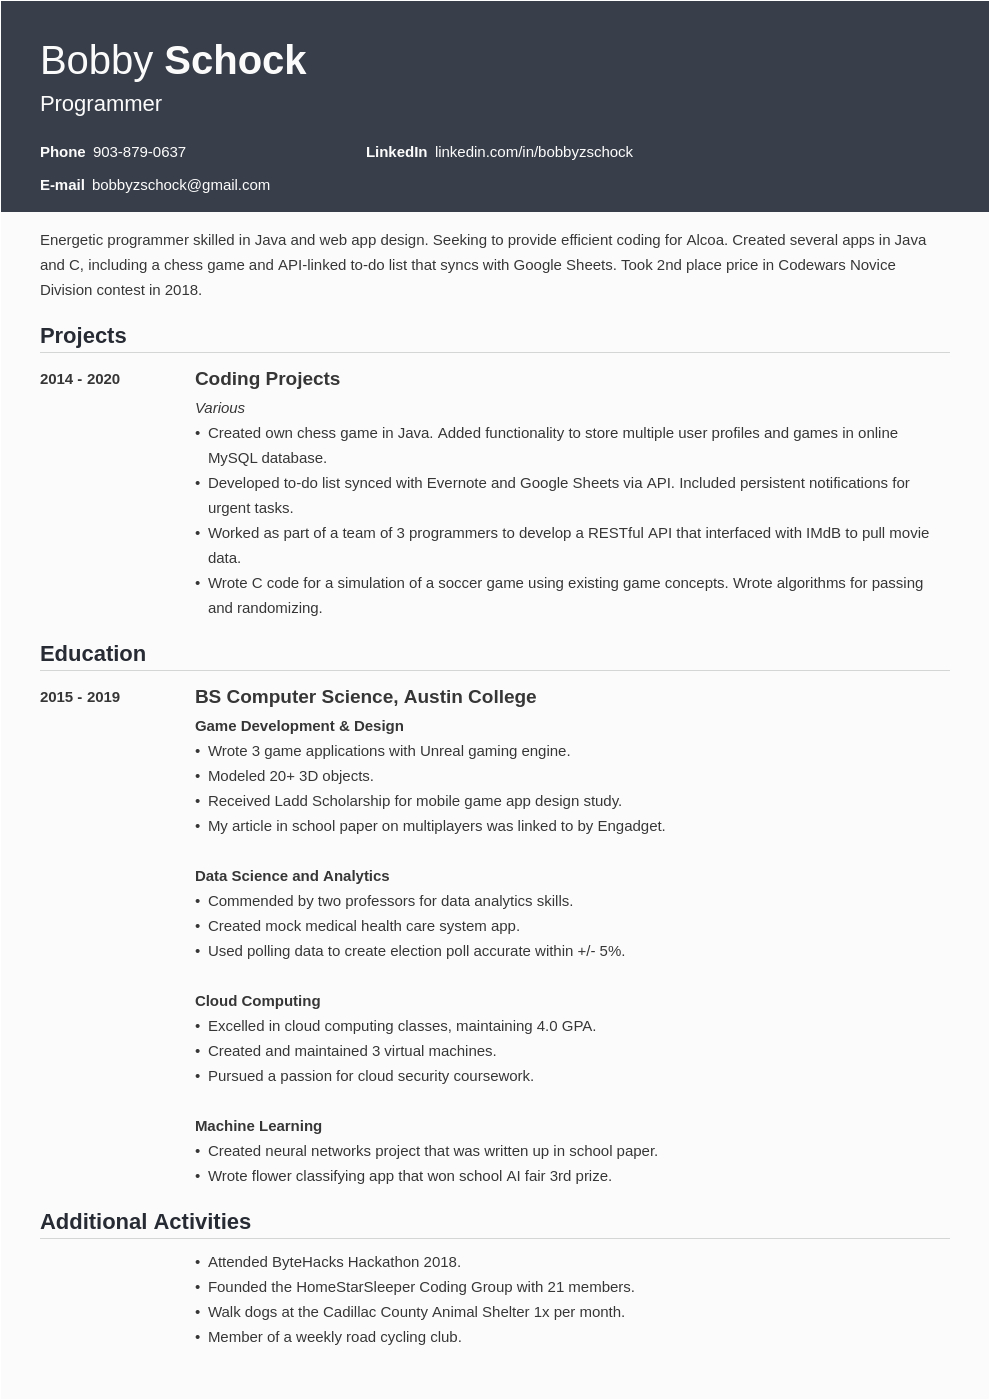 Resume Template if You Have No Experience Cv No Experience Example No Work Experience Resume